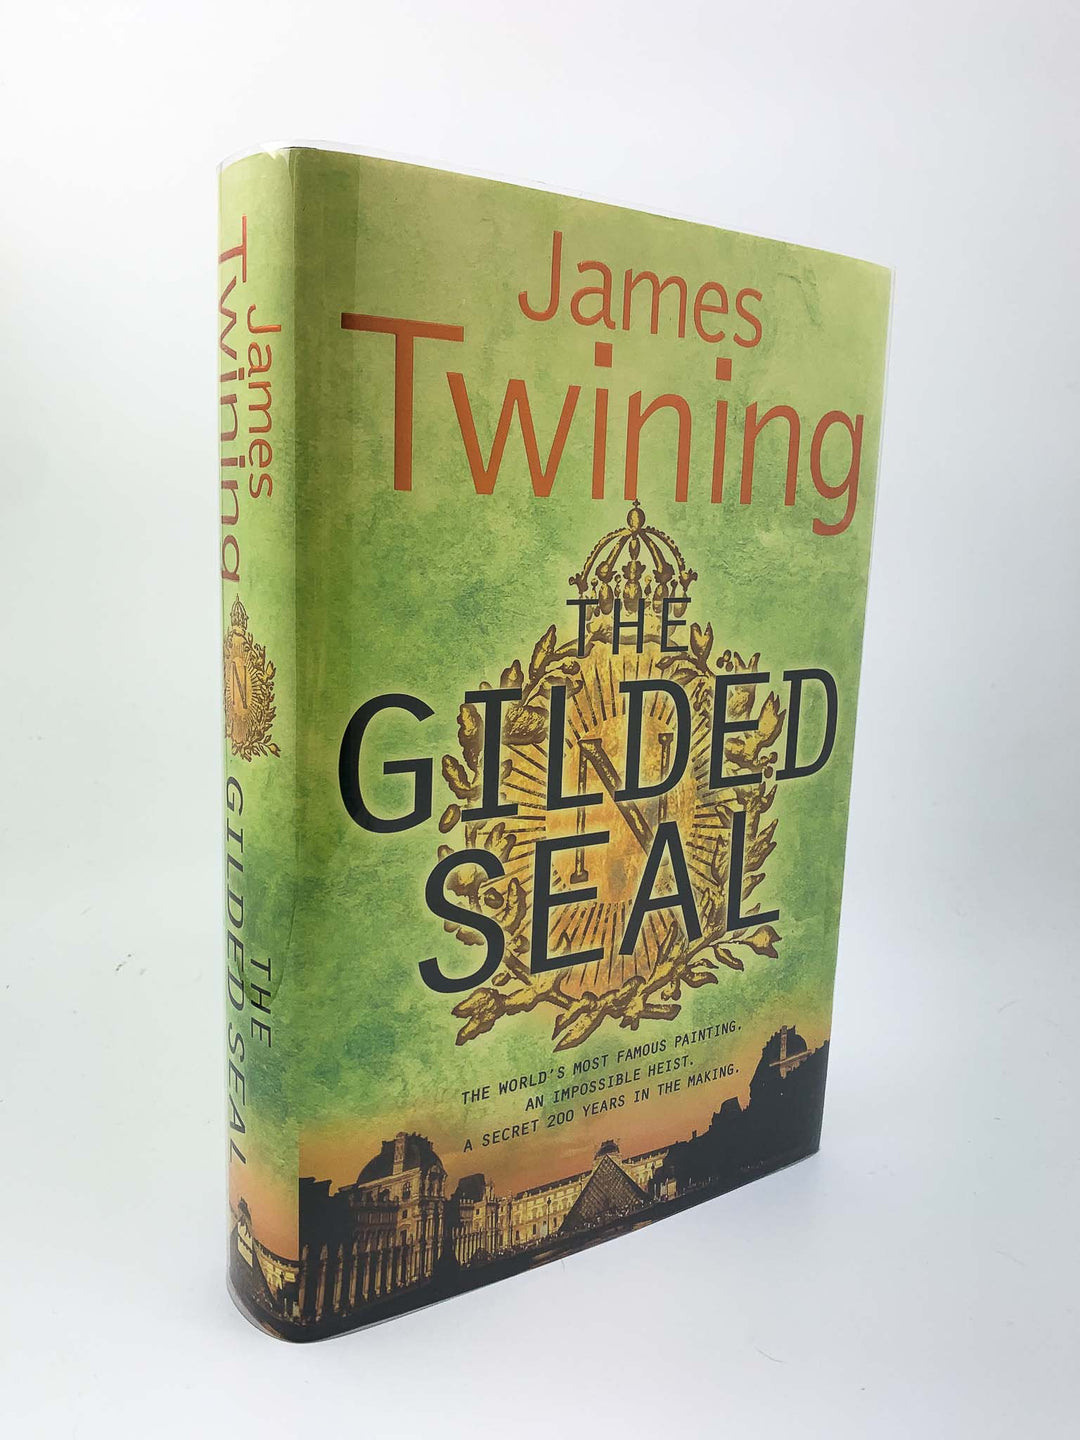 Twining, James - The Gilded Seal - SIGNED | front cover